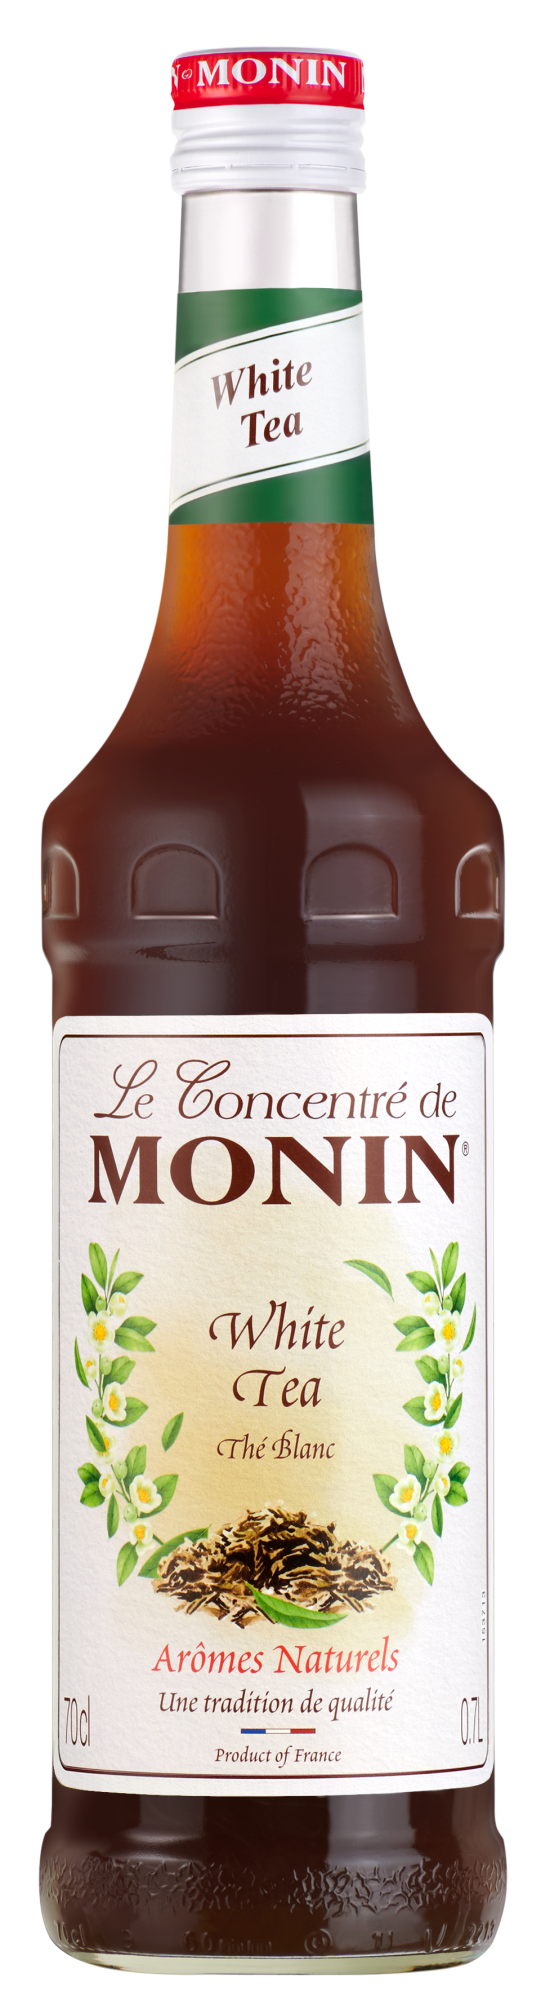 Buy MONIN White Tea Concentrate. The flavour is bright and astringent, with a hint of sweetness from the floral profile.